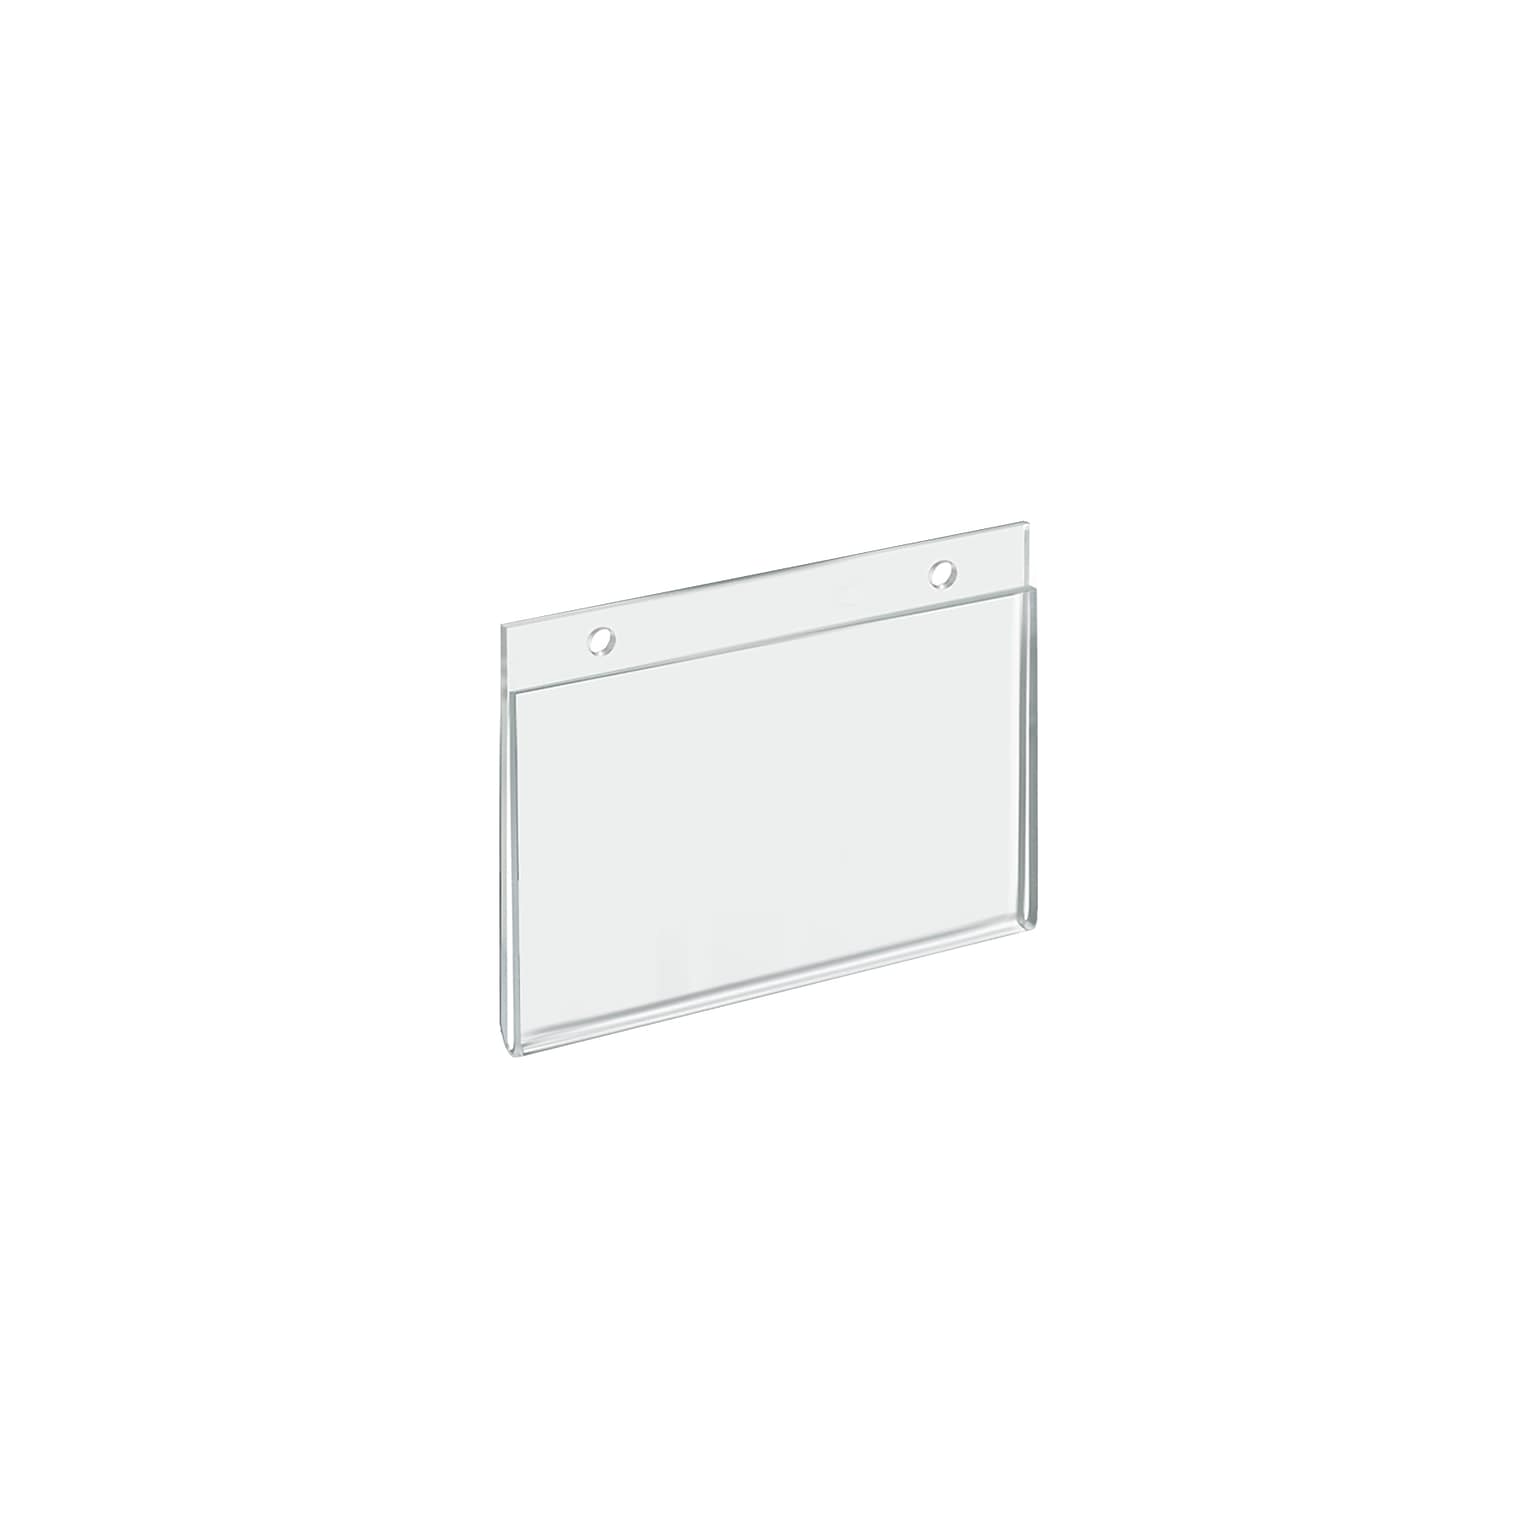 Azar Displays Clear Acrylic Wall Hanging Frame 5 Wide x 3.5 High Horizontal/Landscape, 10-Pack (162725)